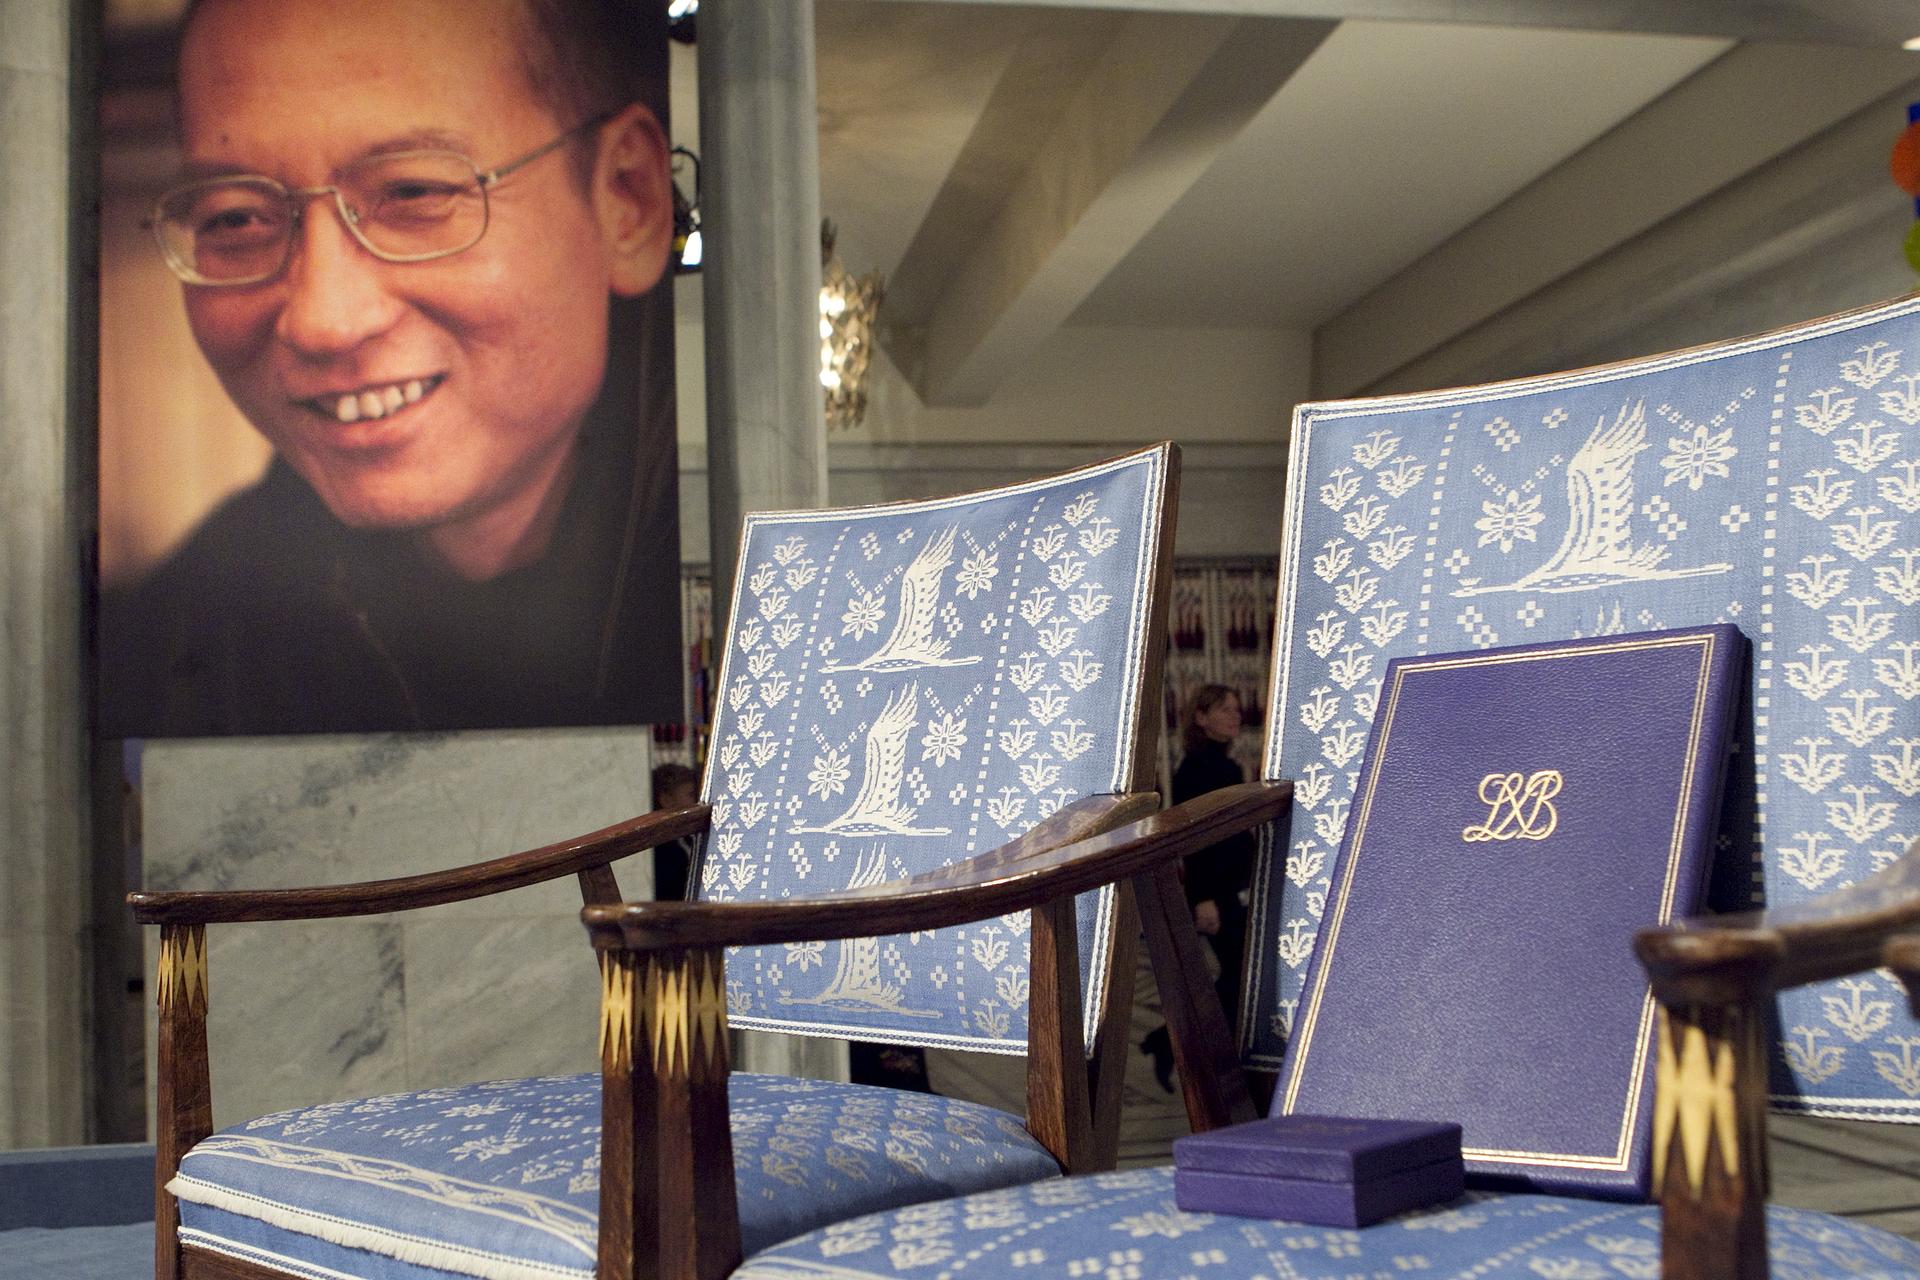 The Nobel certificate and medal is seen on the empty chair where Nobel Peace Prize winner jailed Chinese dissident Liu Xiaobo would have sat